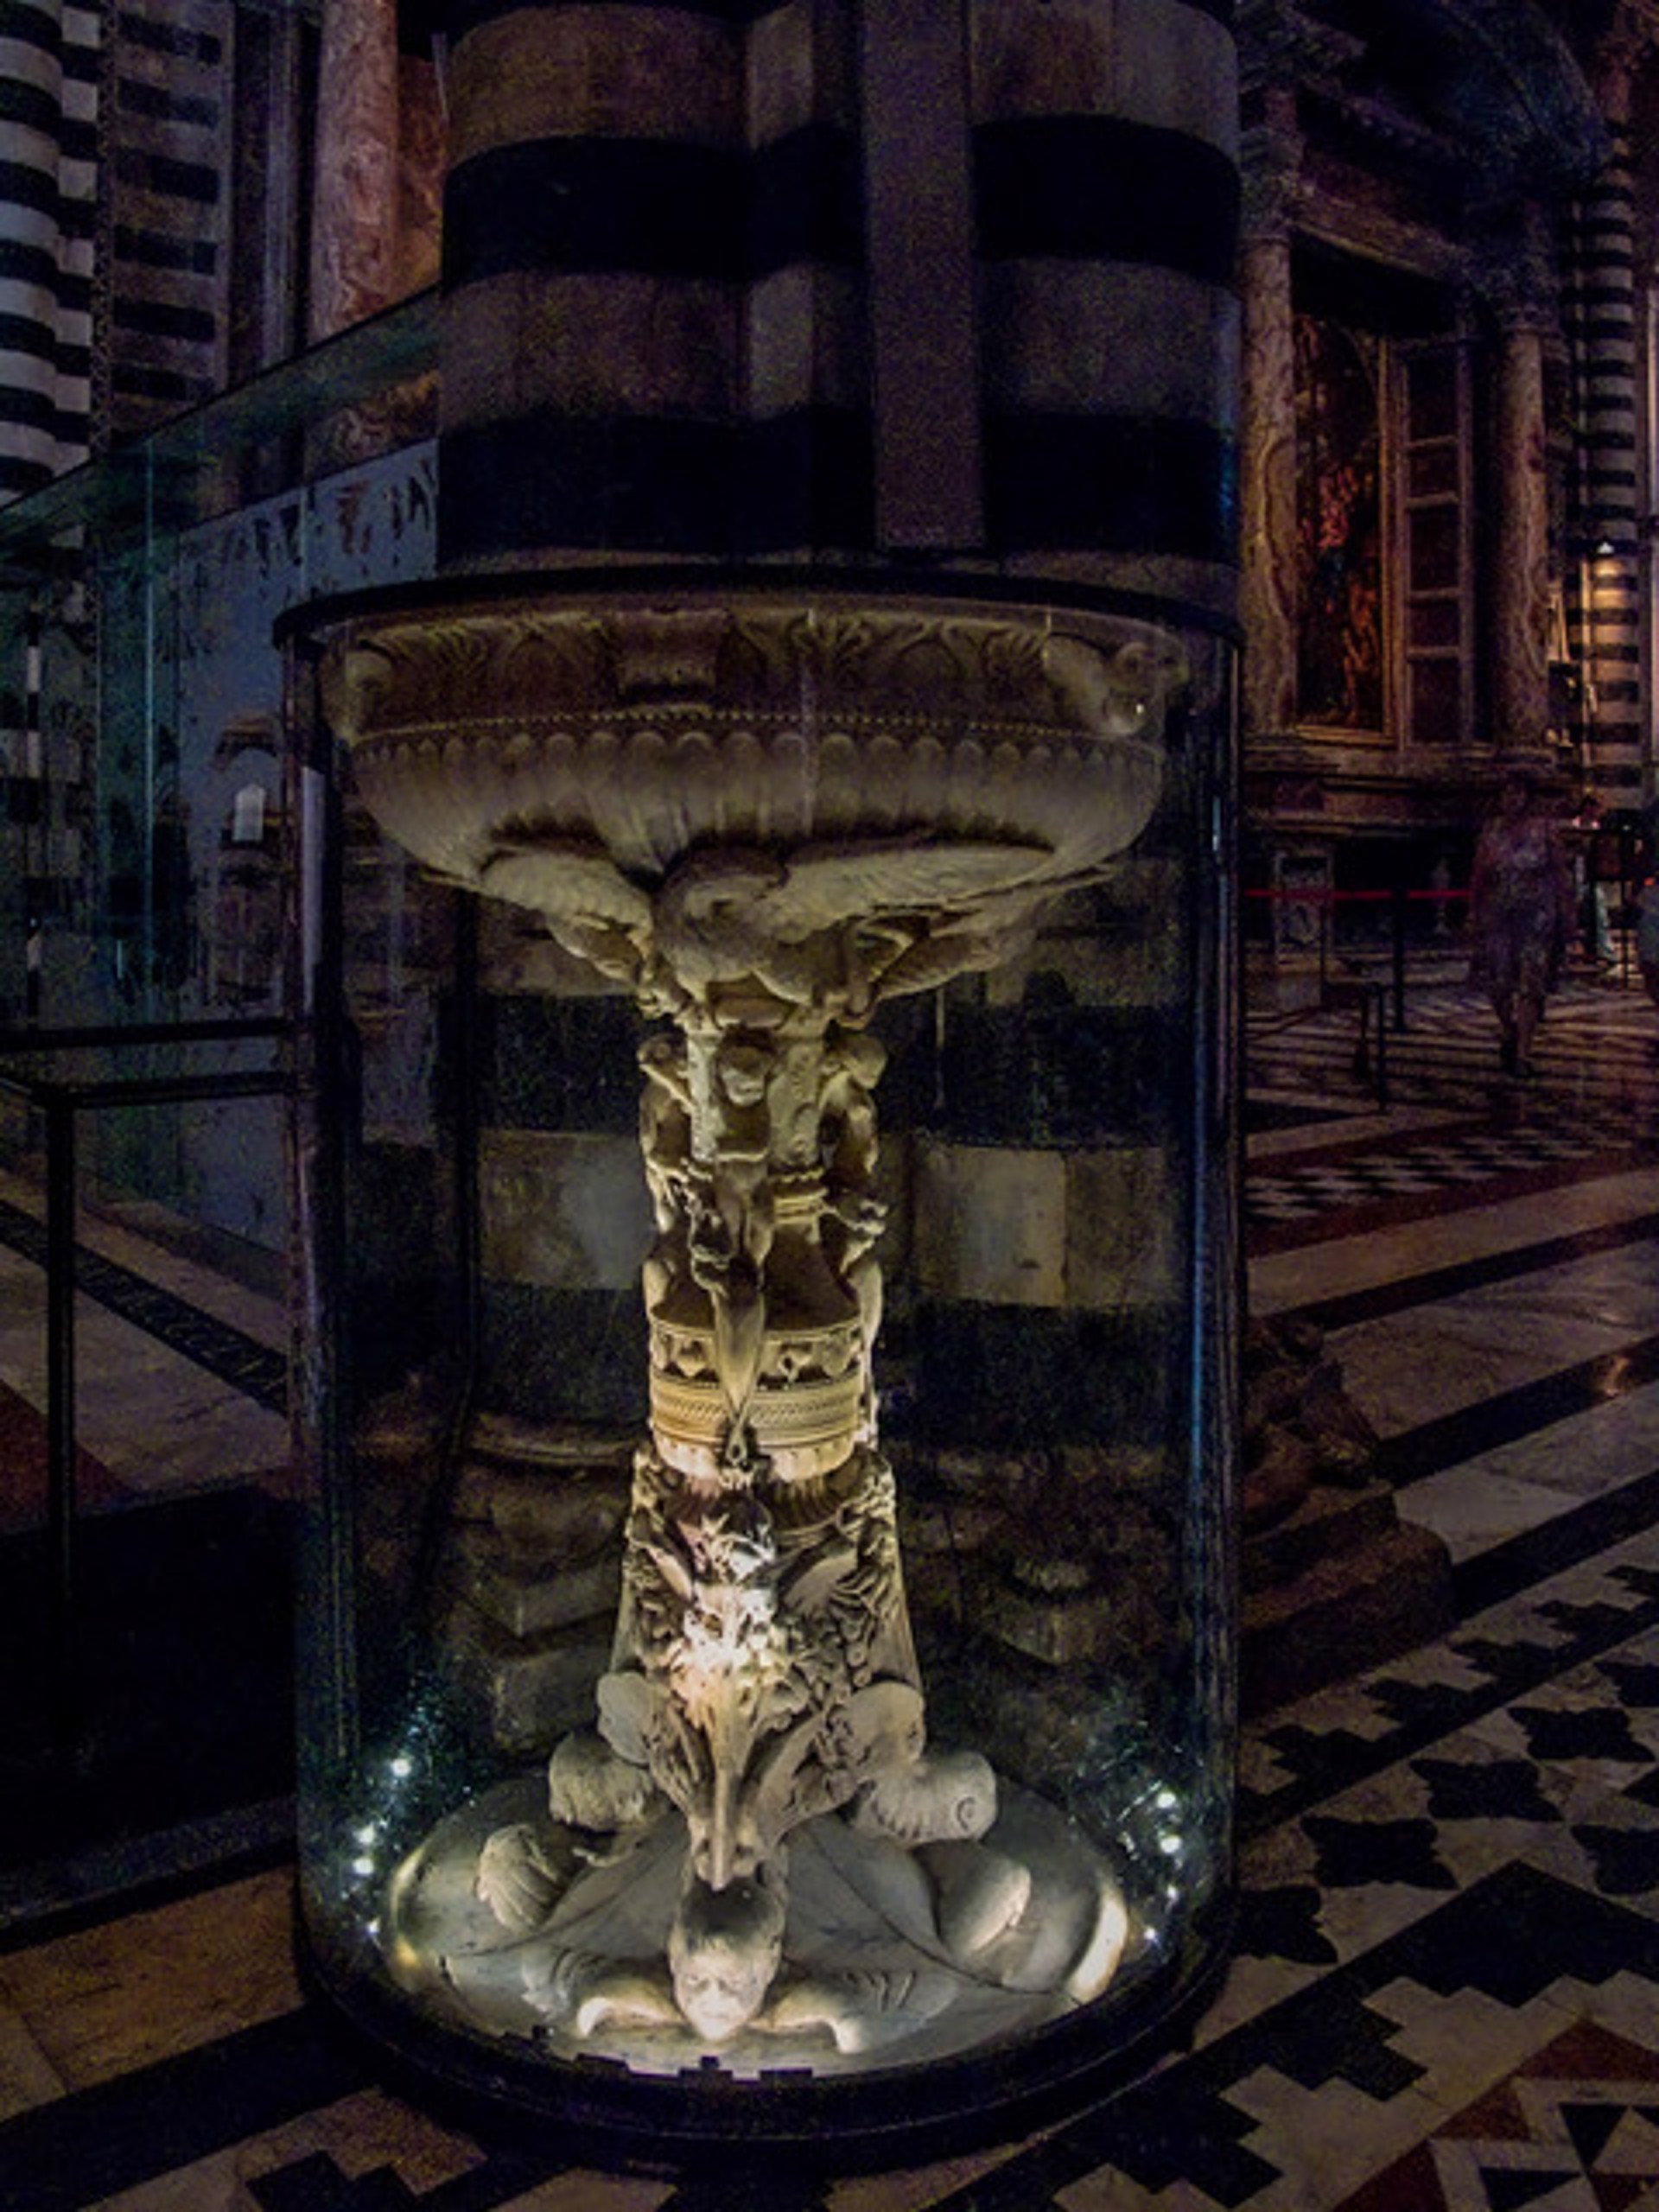 Fountain, In the Duomo, Siena, Italy by Lawrence McFarland